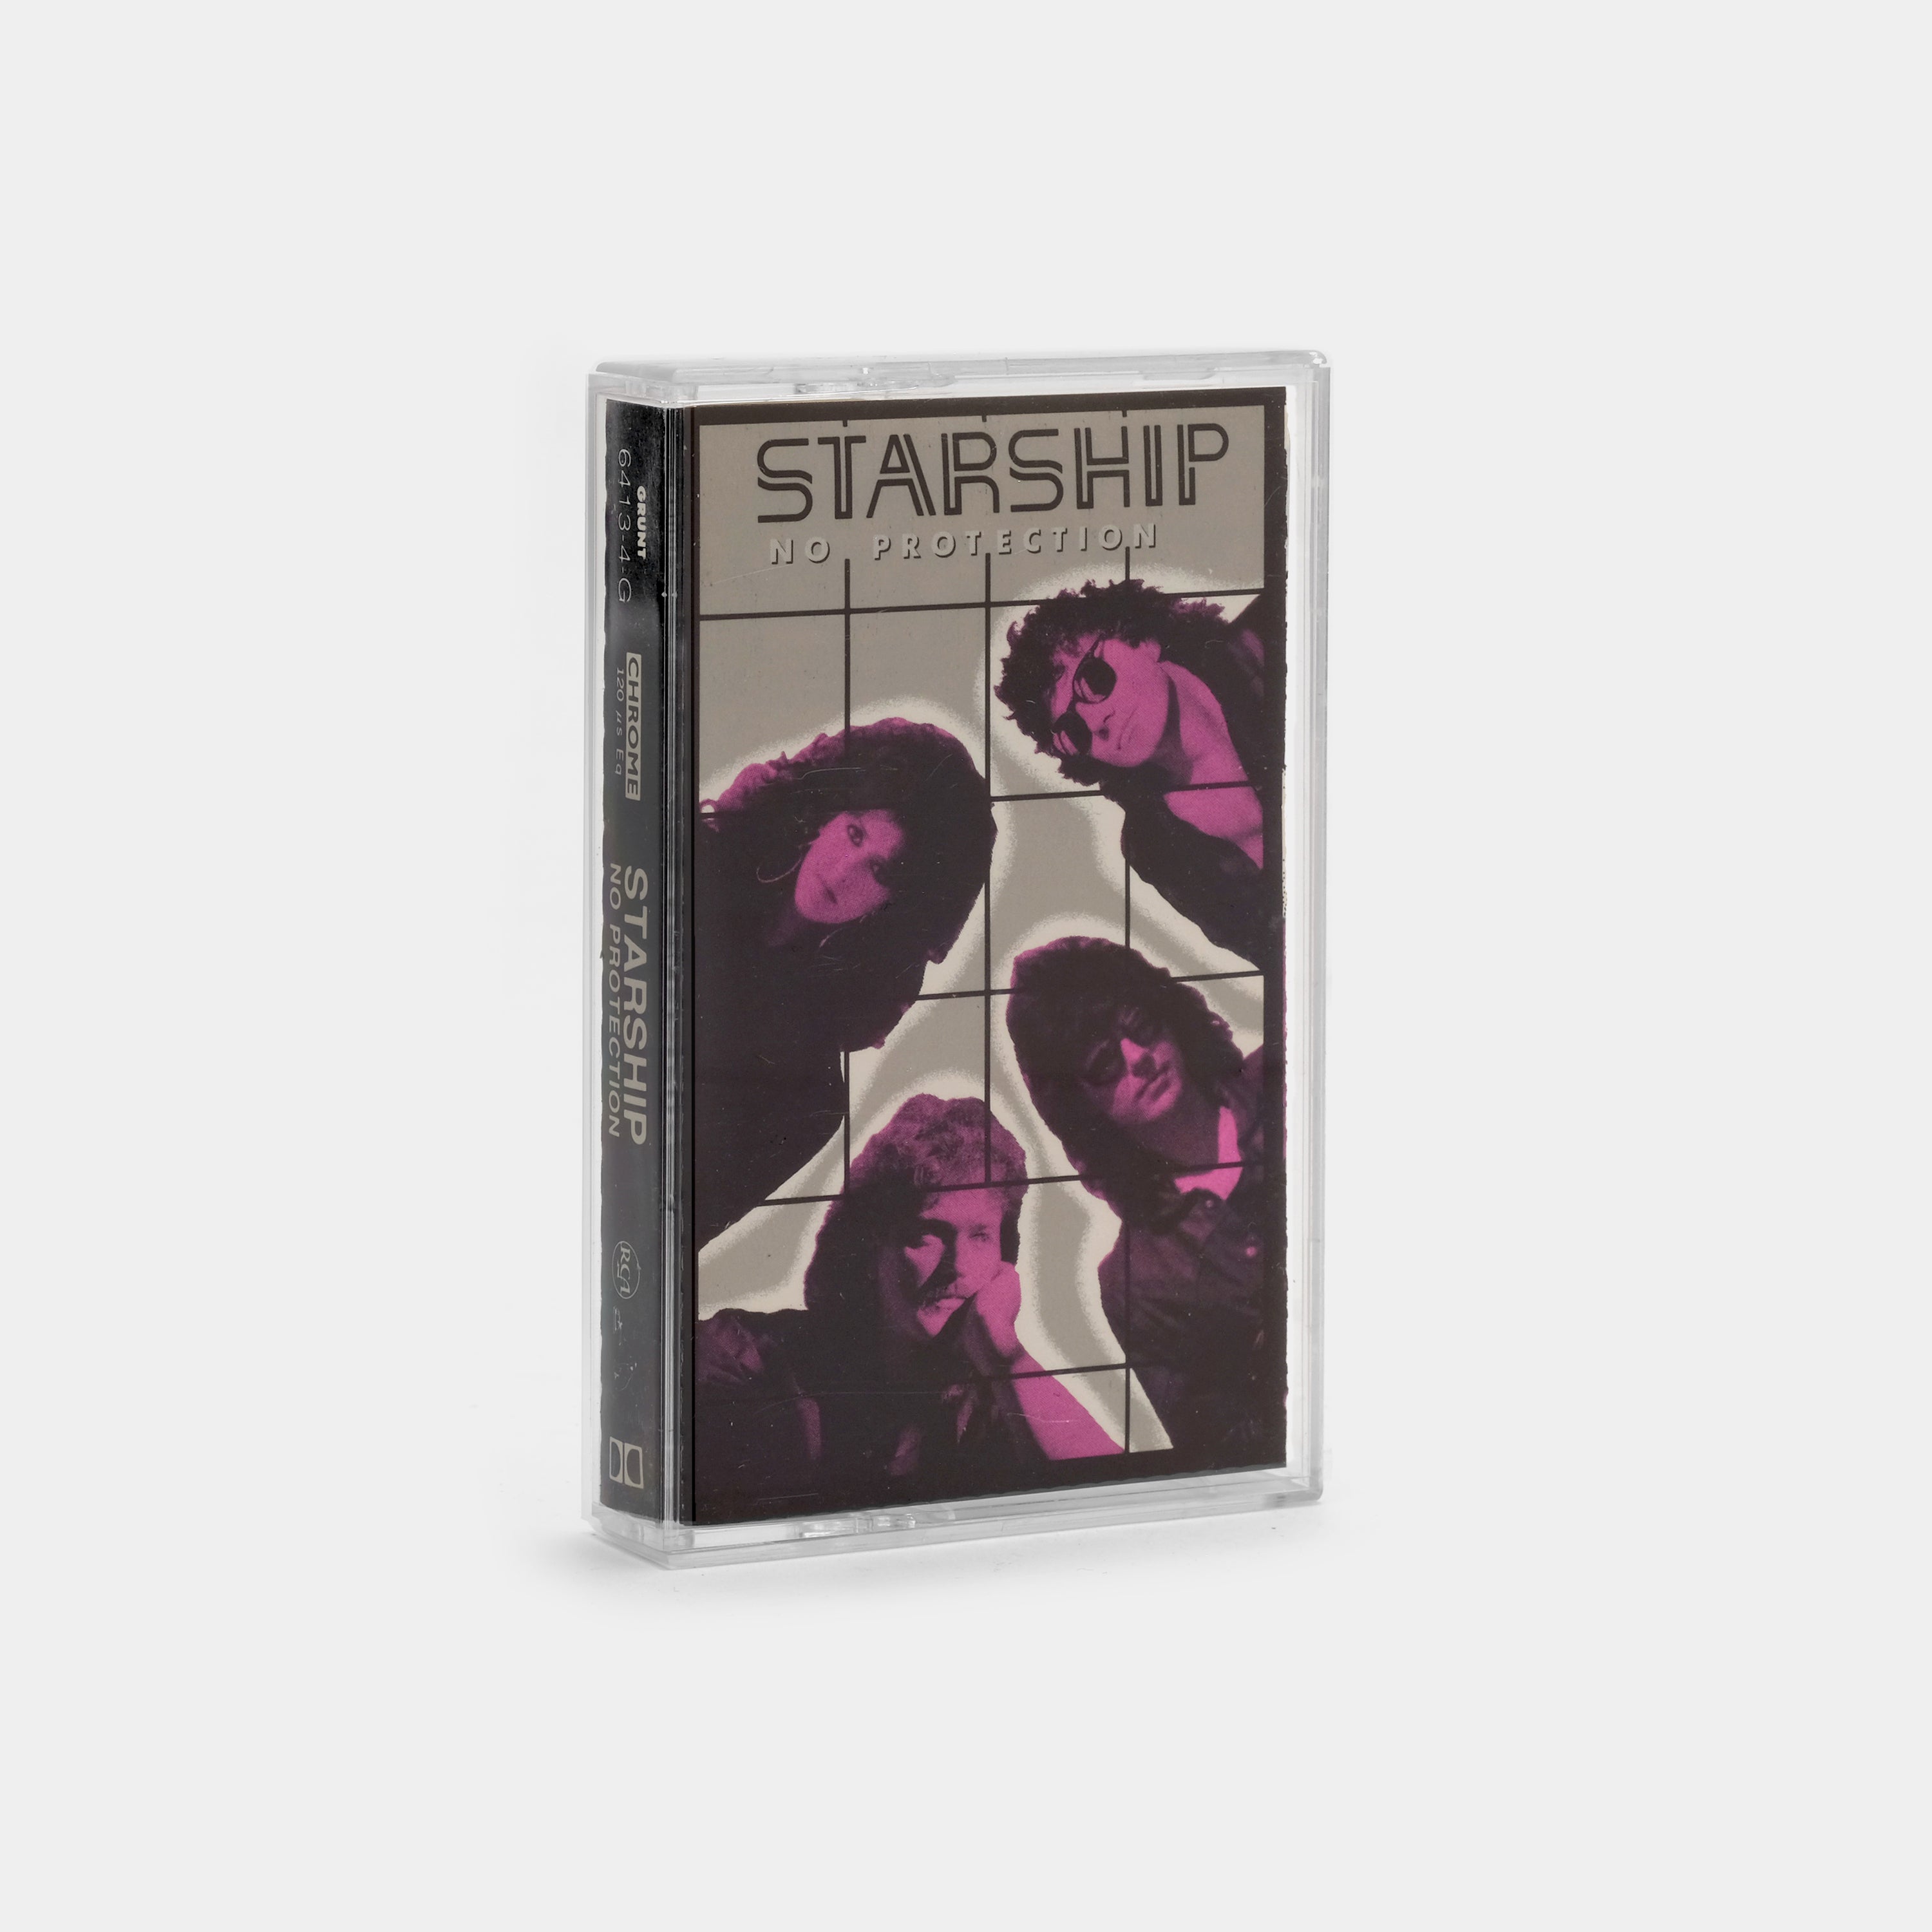 Starship - No Protection Cassette Tape